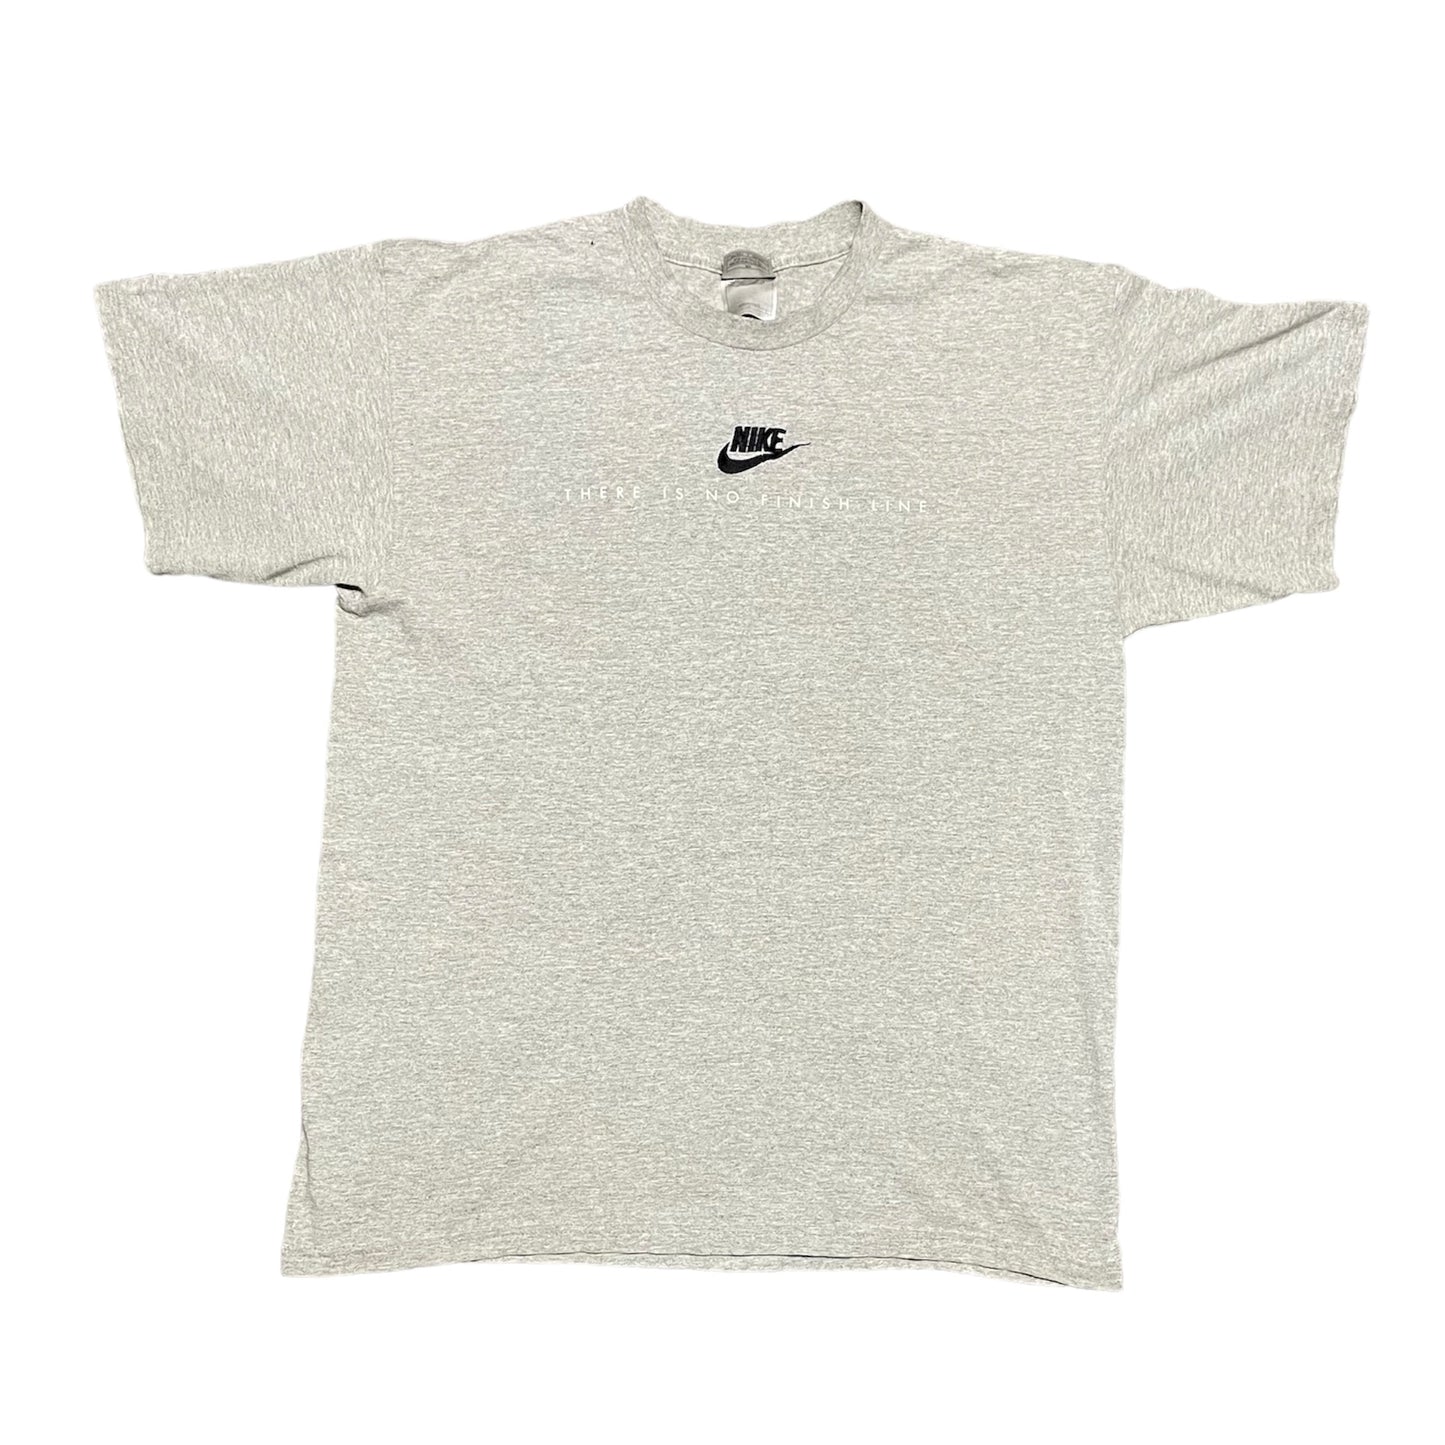 Vintage Nike There Is No Finish Line T-Shirt